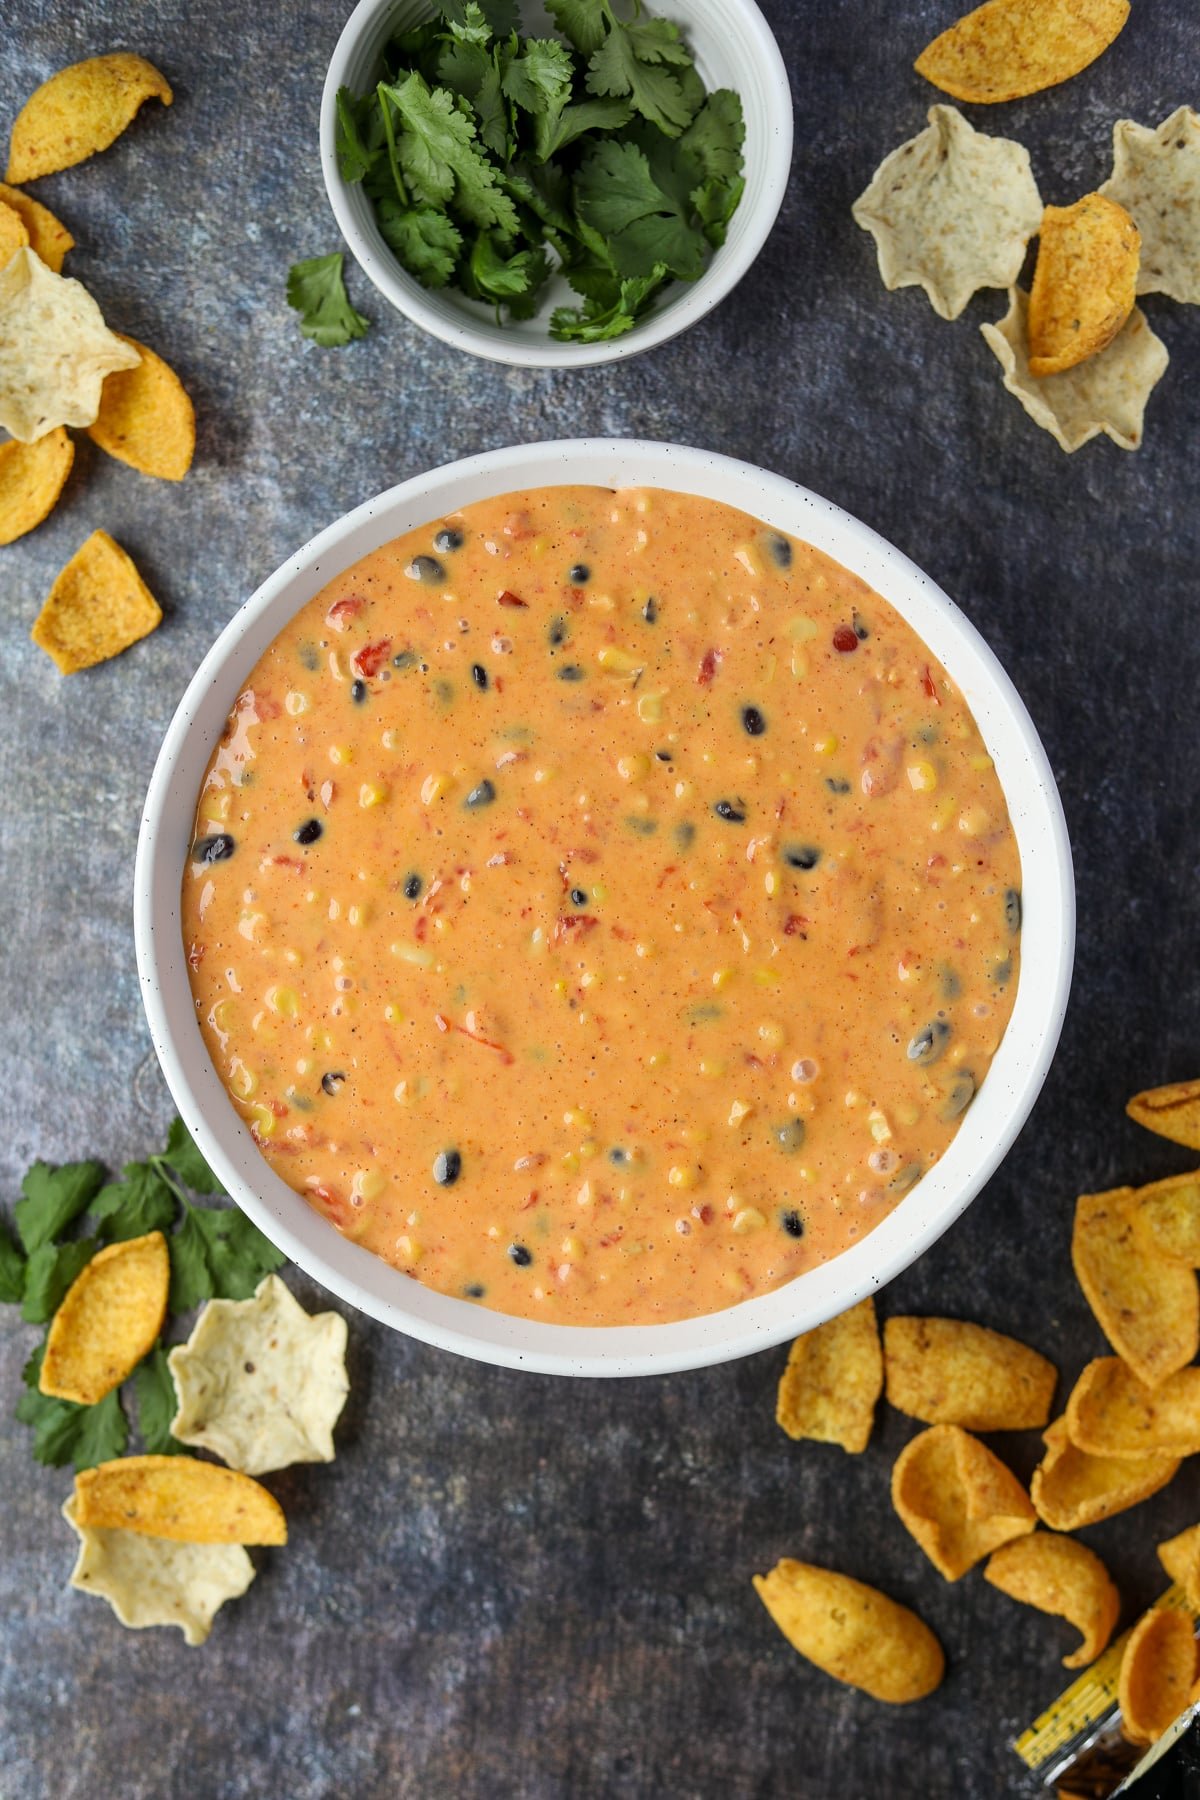 A bowl with Southwest inspired Rotel dip, with tortilla scoops and corn chips around.